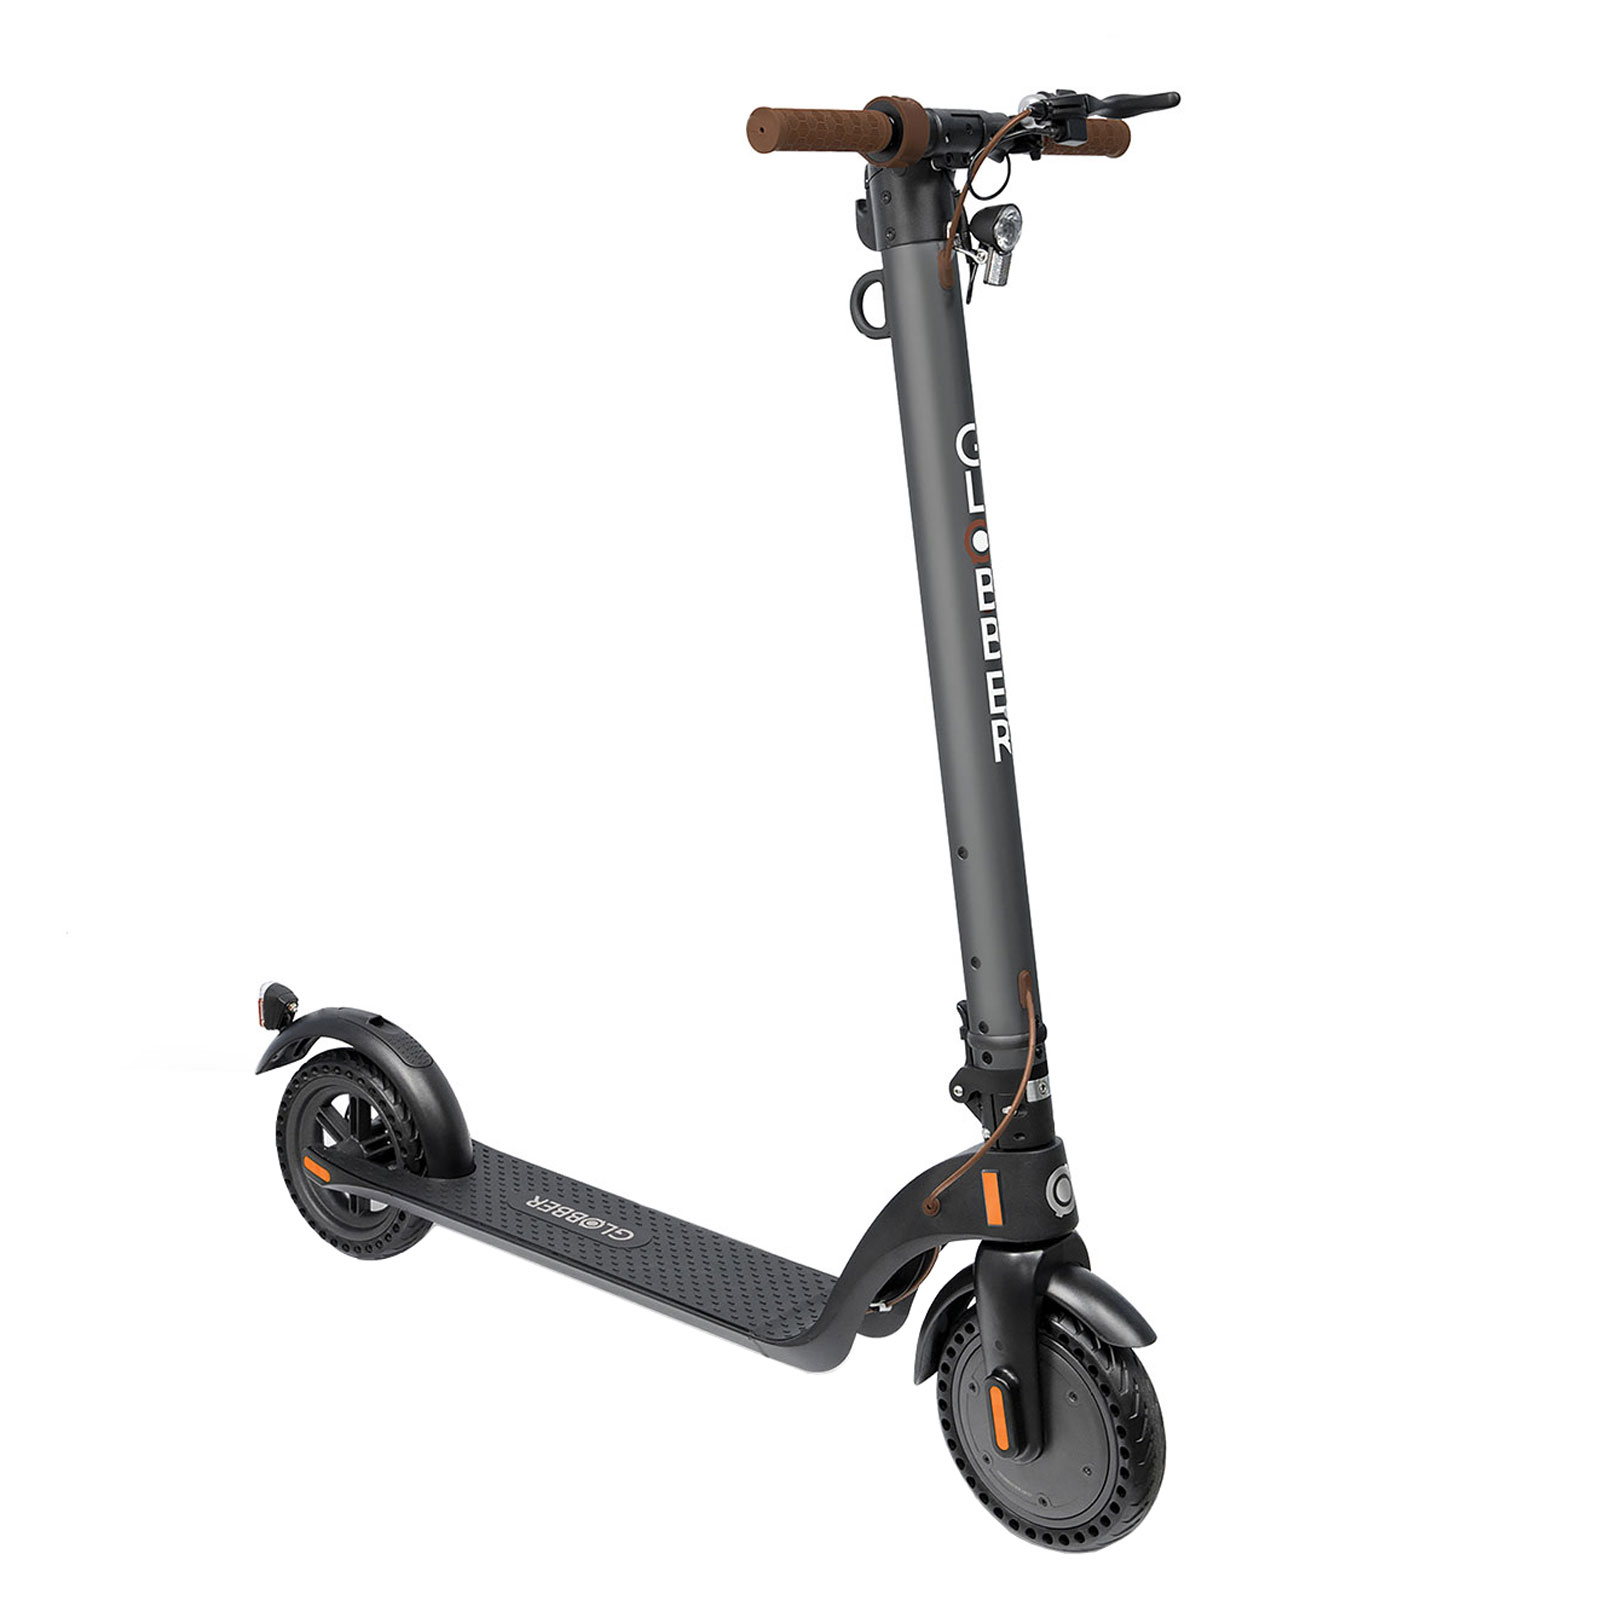 Globber One K E-motion 23 Folding Electric Scooter - Titanium / Brown (Age 14 to Adult)